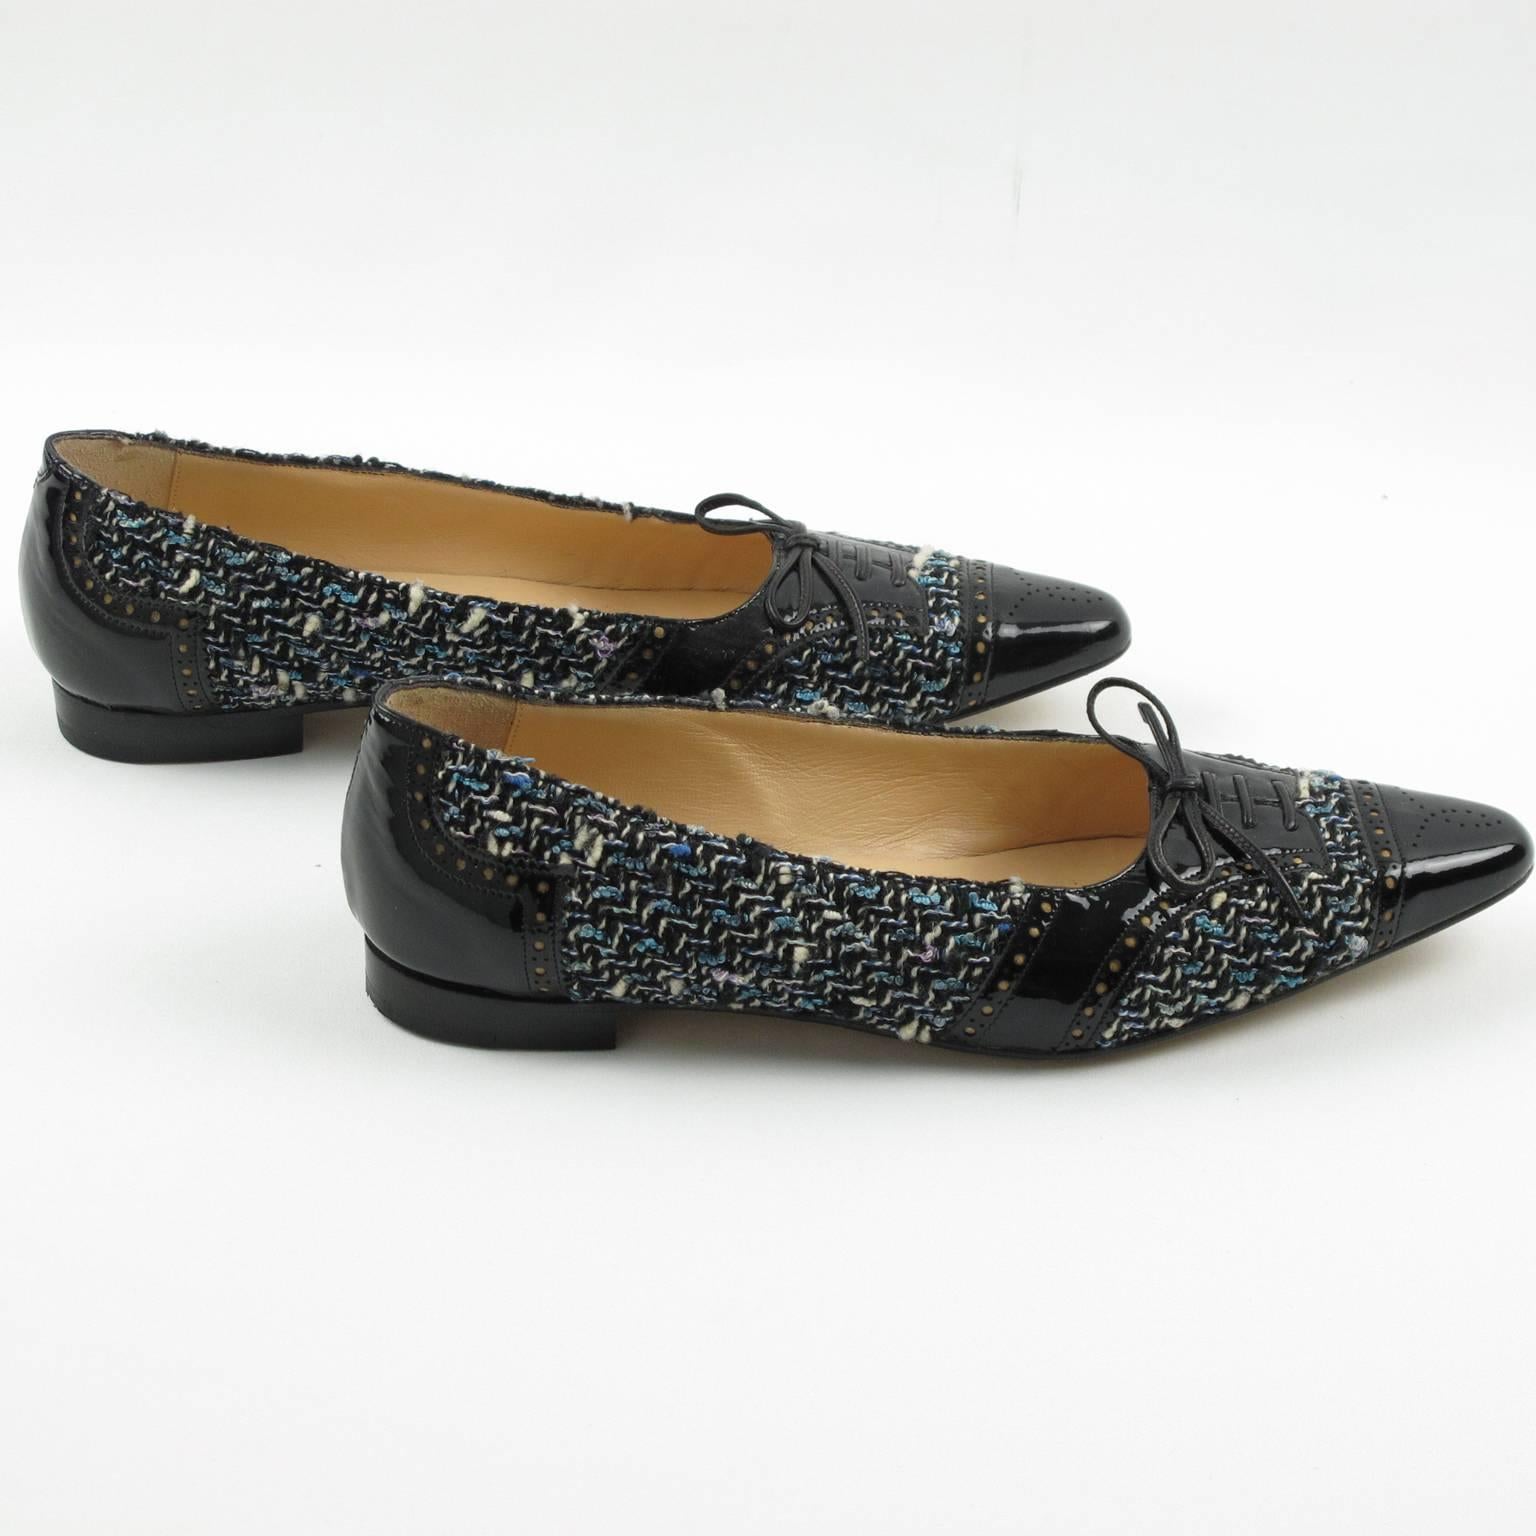 Women's Manolo Blahnik Black Patent Leather and Tweed Fabric Flats Shoes Size 37.5 / 7.5